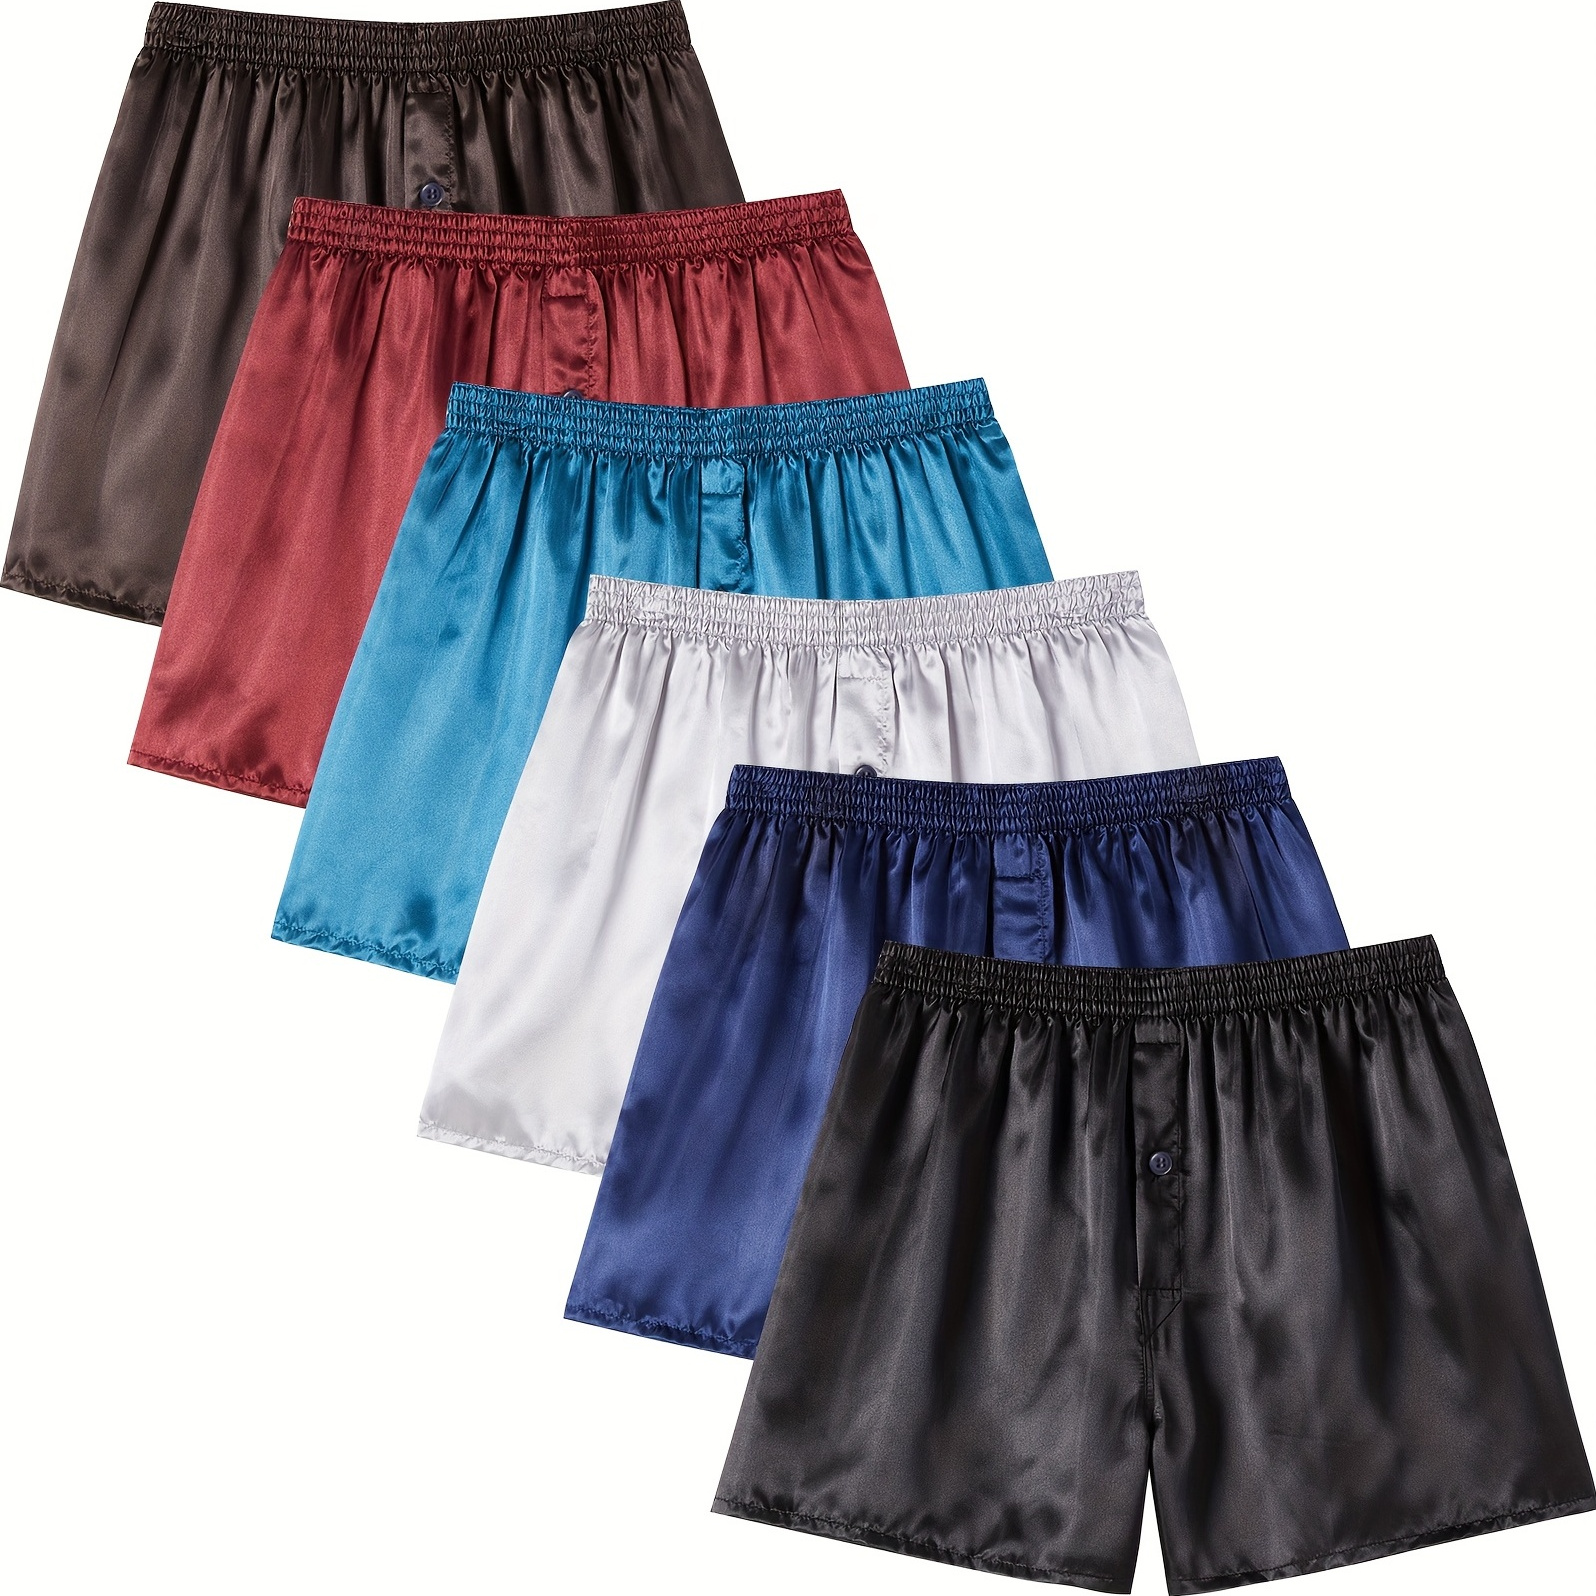 Trendsetting satin boxer shorts For Leisure And Fashion 